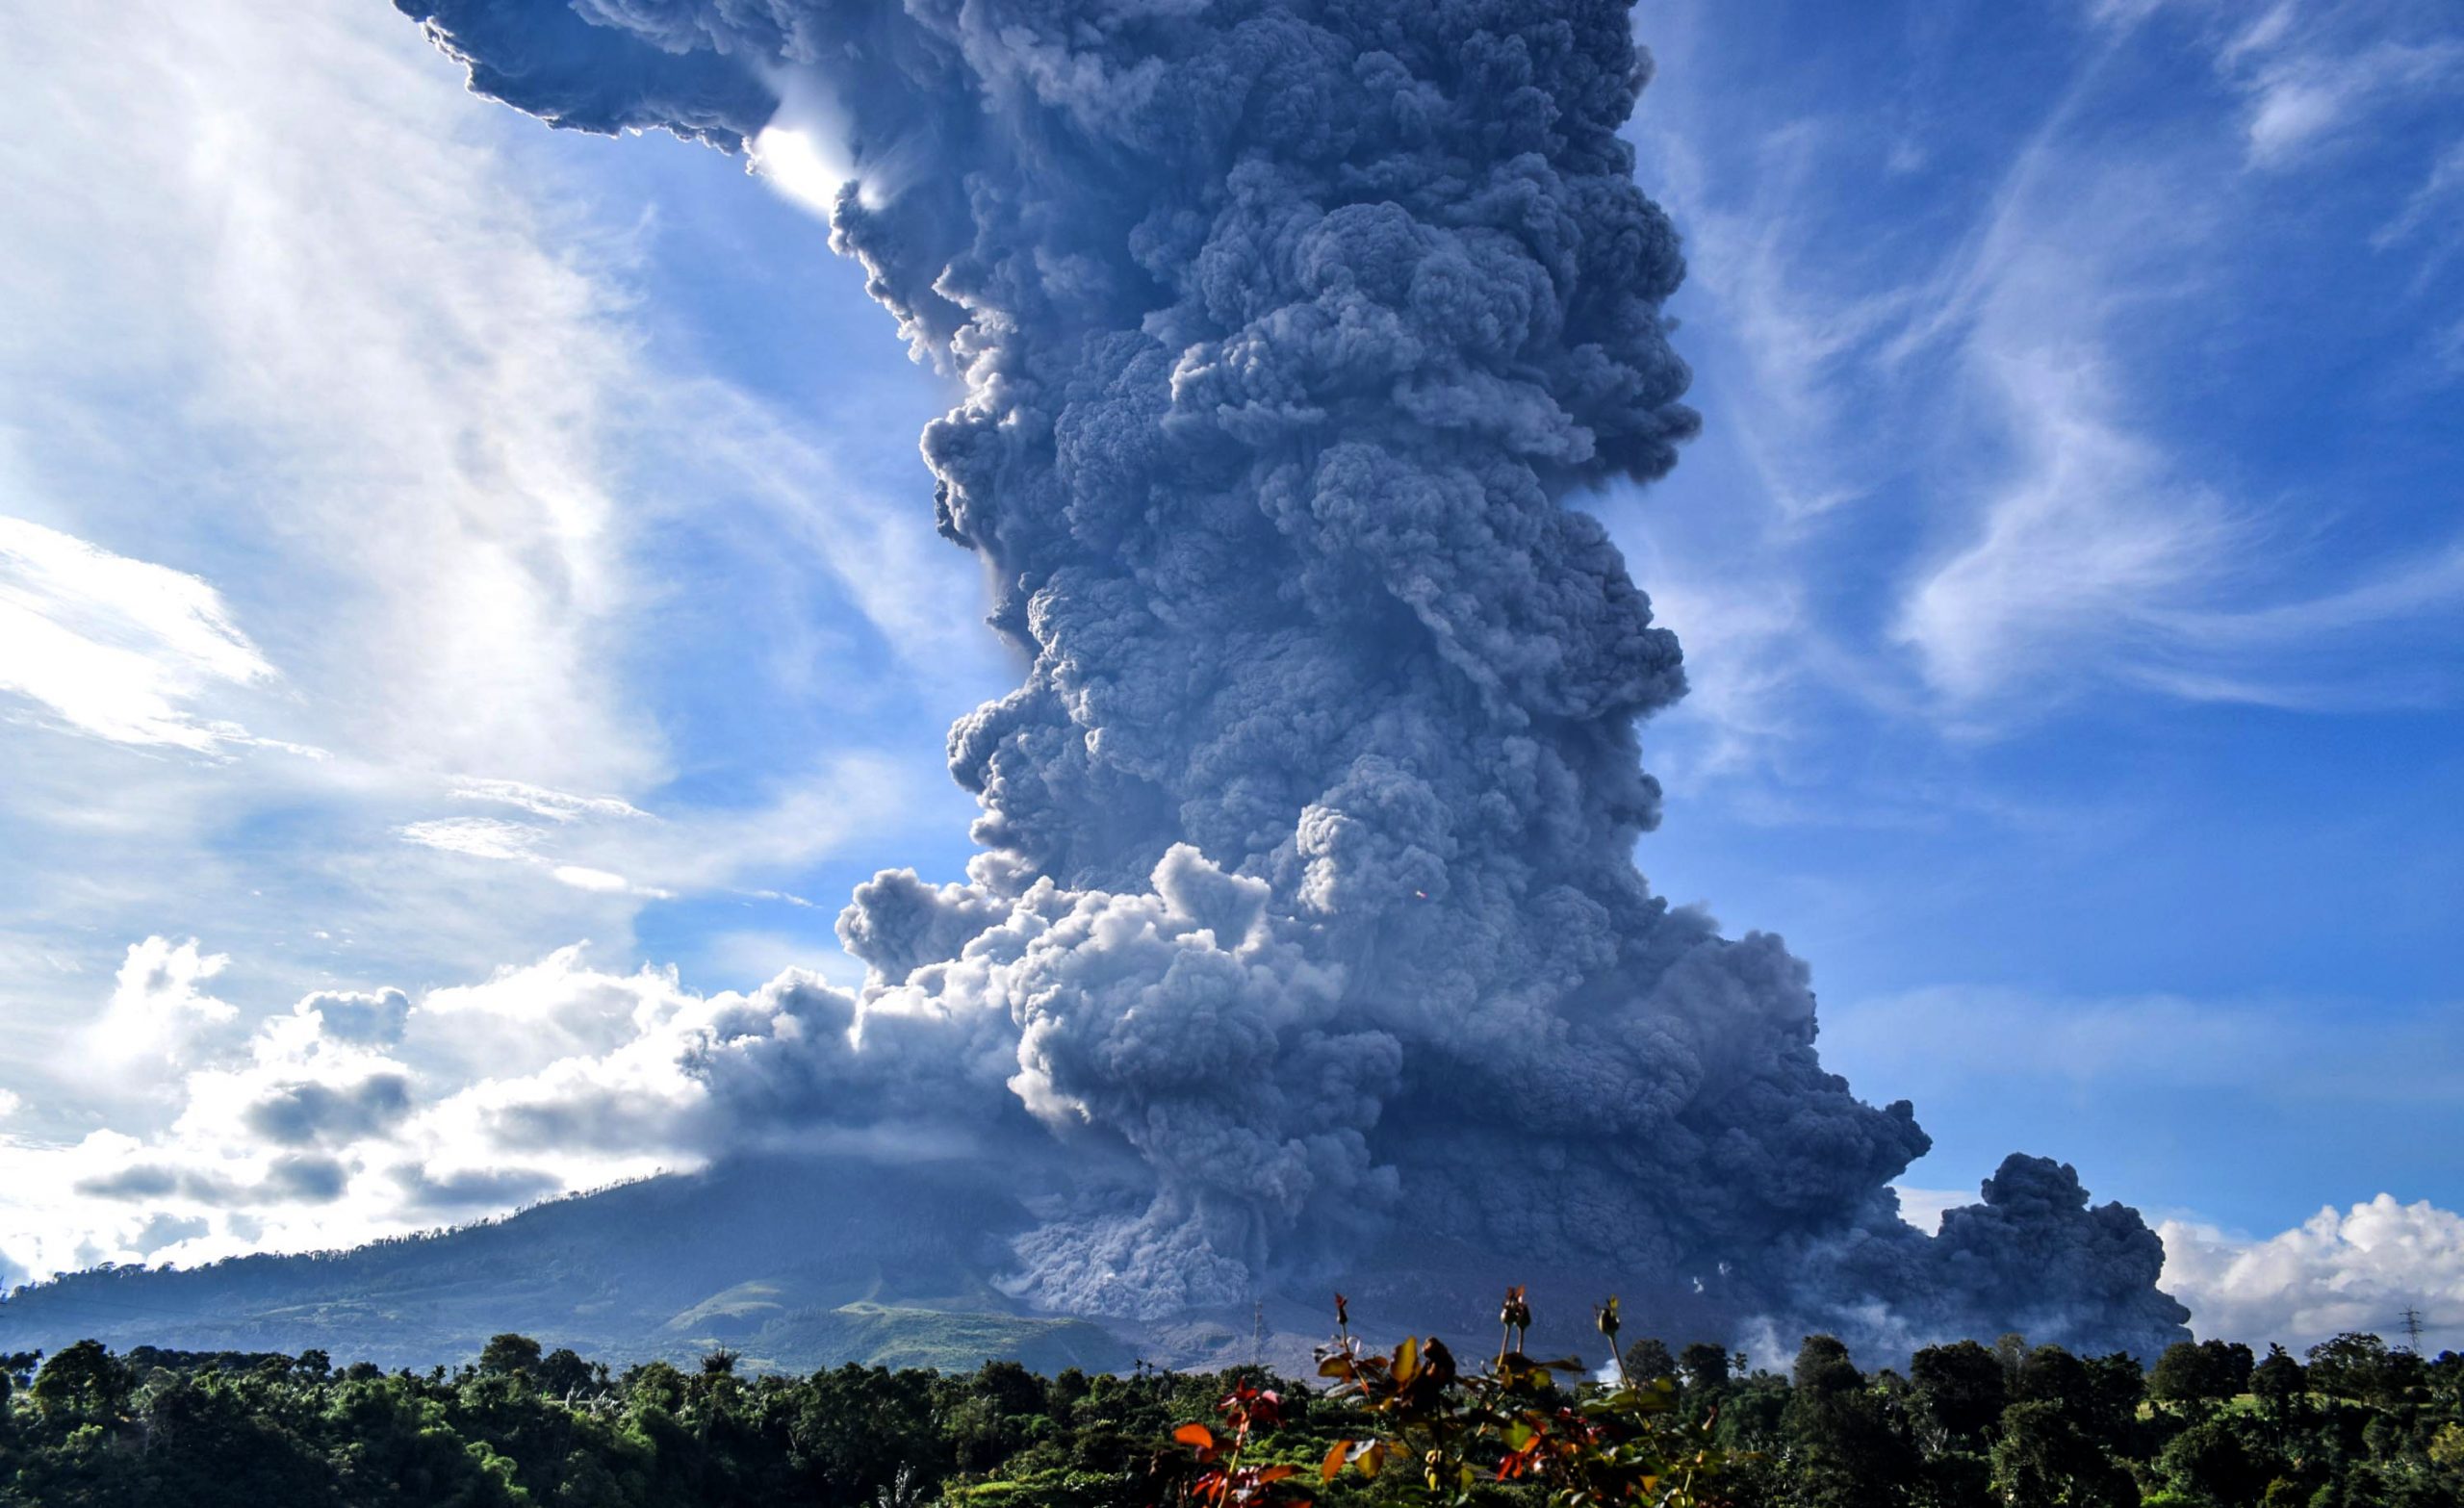 epa08594601 (FILE) - Mount Sinabung spews volcanic smoke in Tiga Pancur Village, Karo, North Sumatra, Indonesia, 09 June 2019 (reissued 10 August 2020). According to latest media reports, Mount Sinabung, one of the most active volcanoes in Indonesia, erupted on 10 August spewing a column of volcanic ash high into the sky. Indonesia sits on the Pacific Ring of Fire, which accounts for 80 percent of the world's seismic activity.  EPA/SARIANTO SEMBIRING